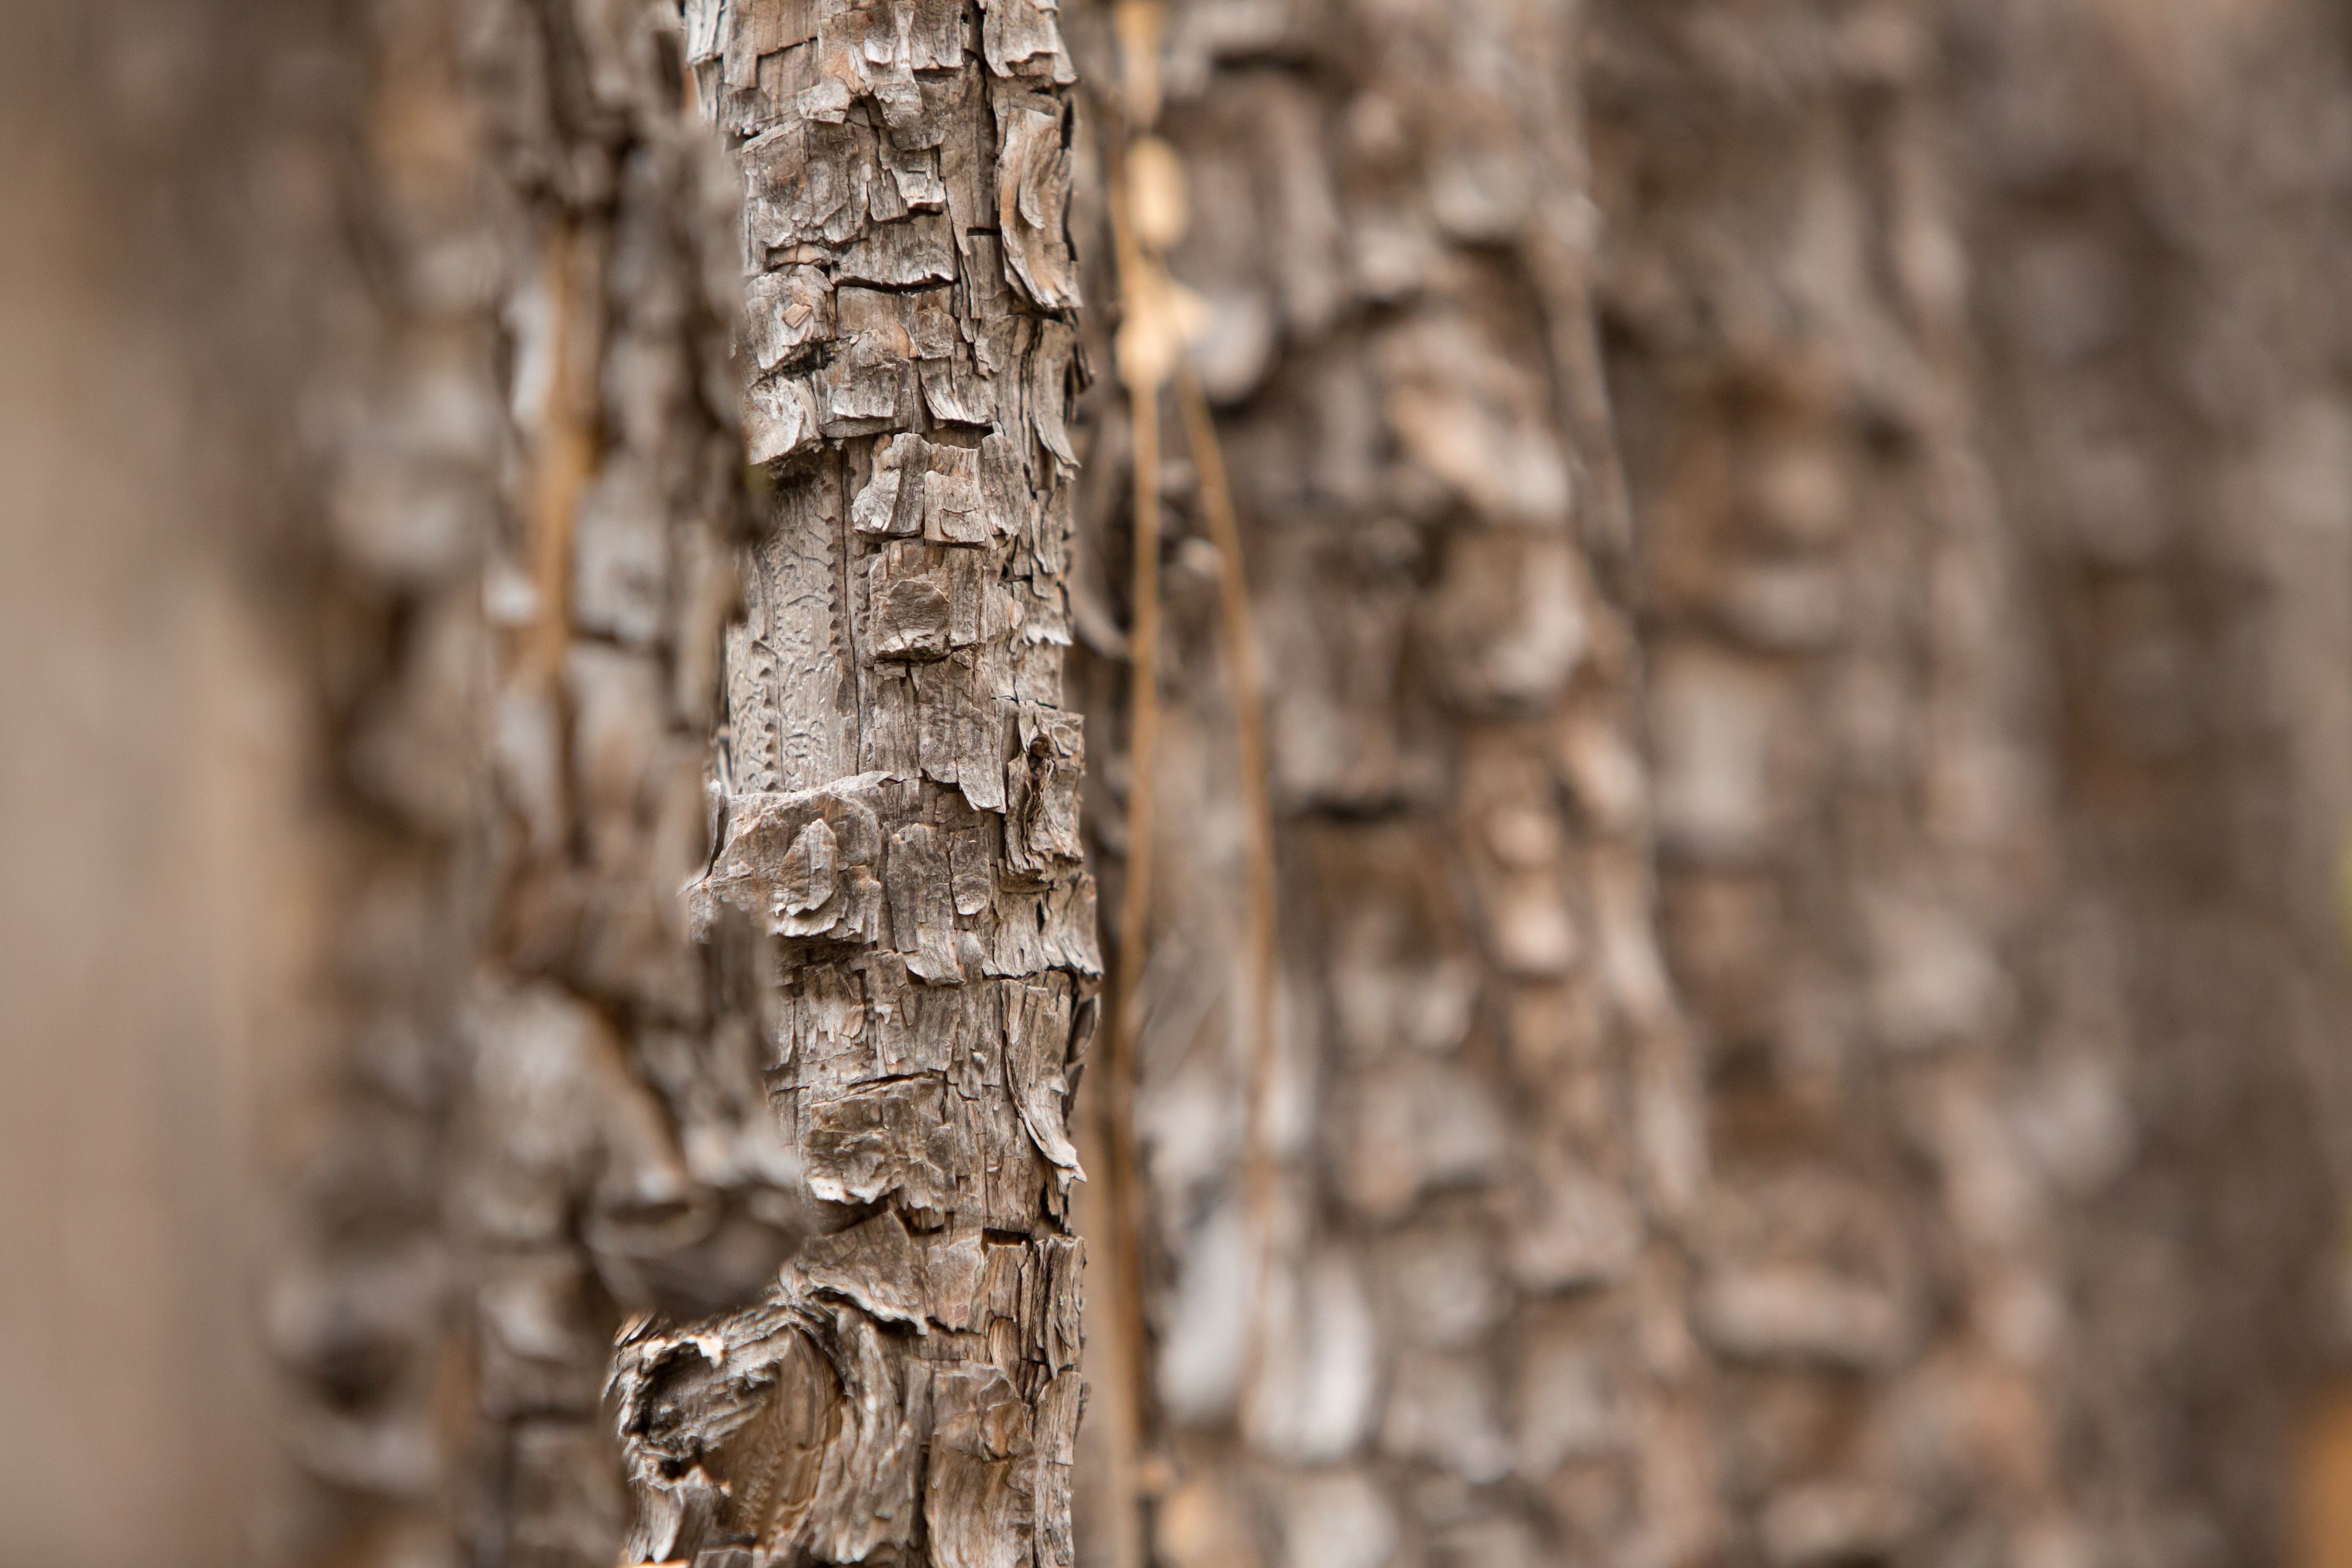 A close-up of the texture of tree bark.